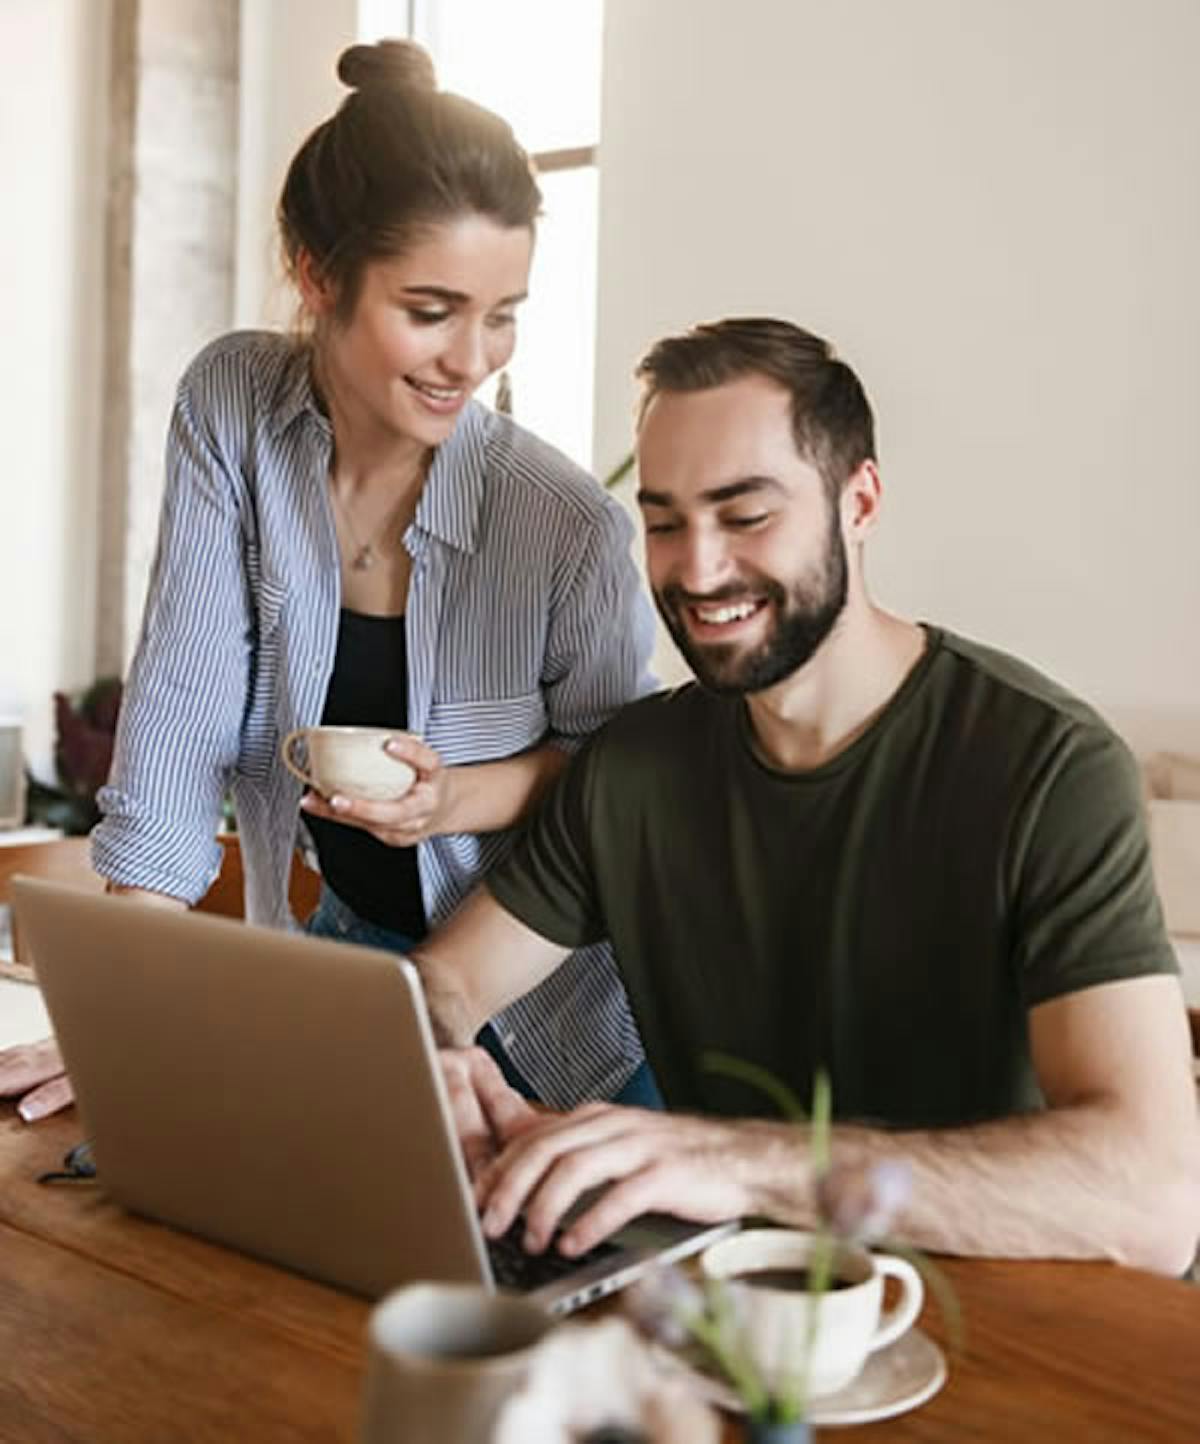 Couple Looking At Laptop